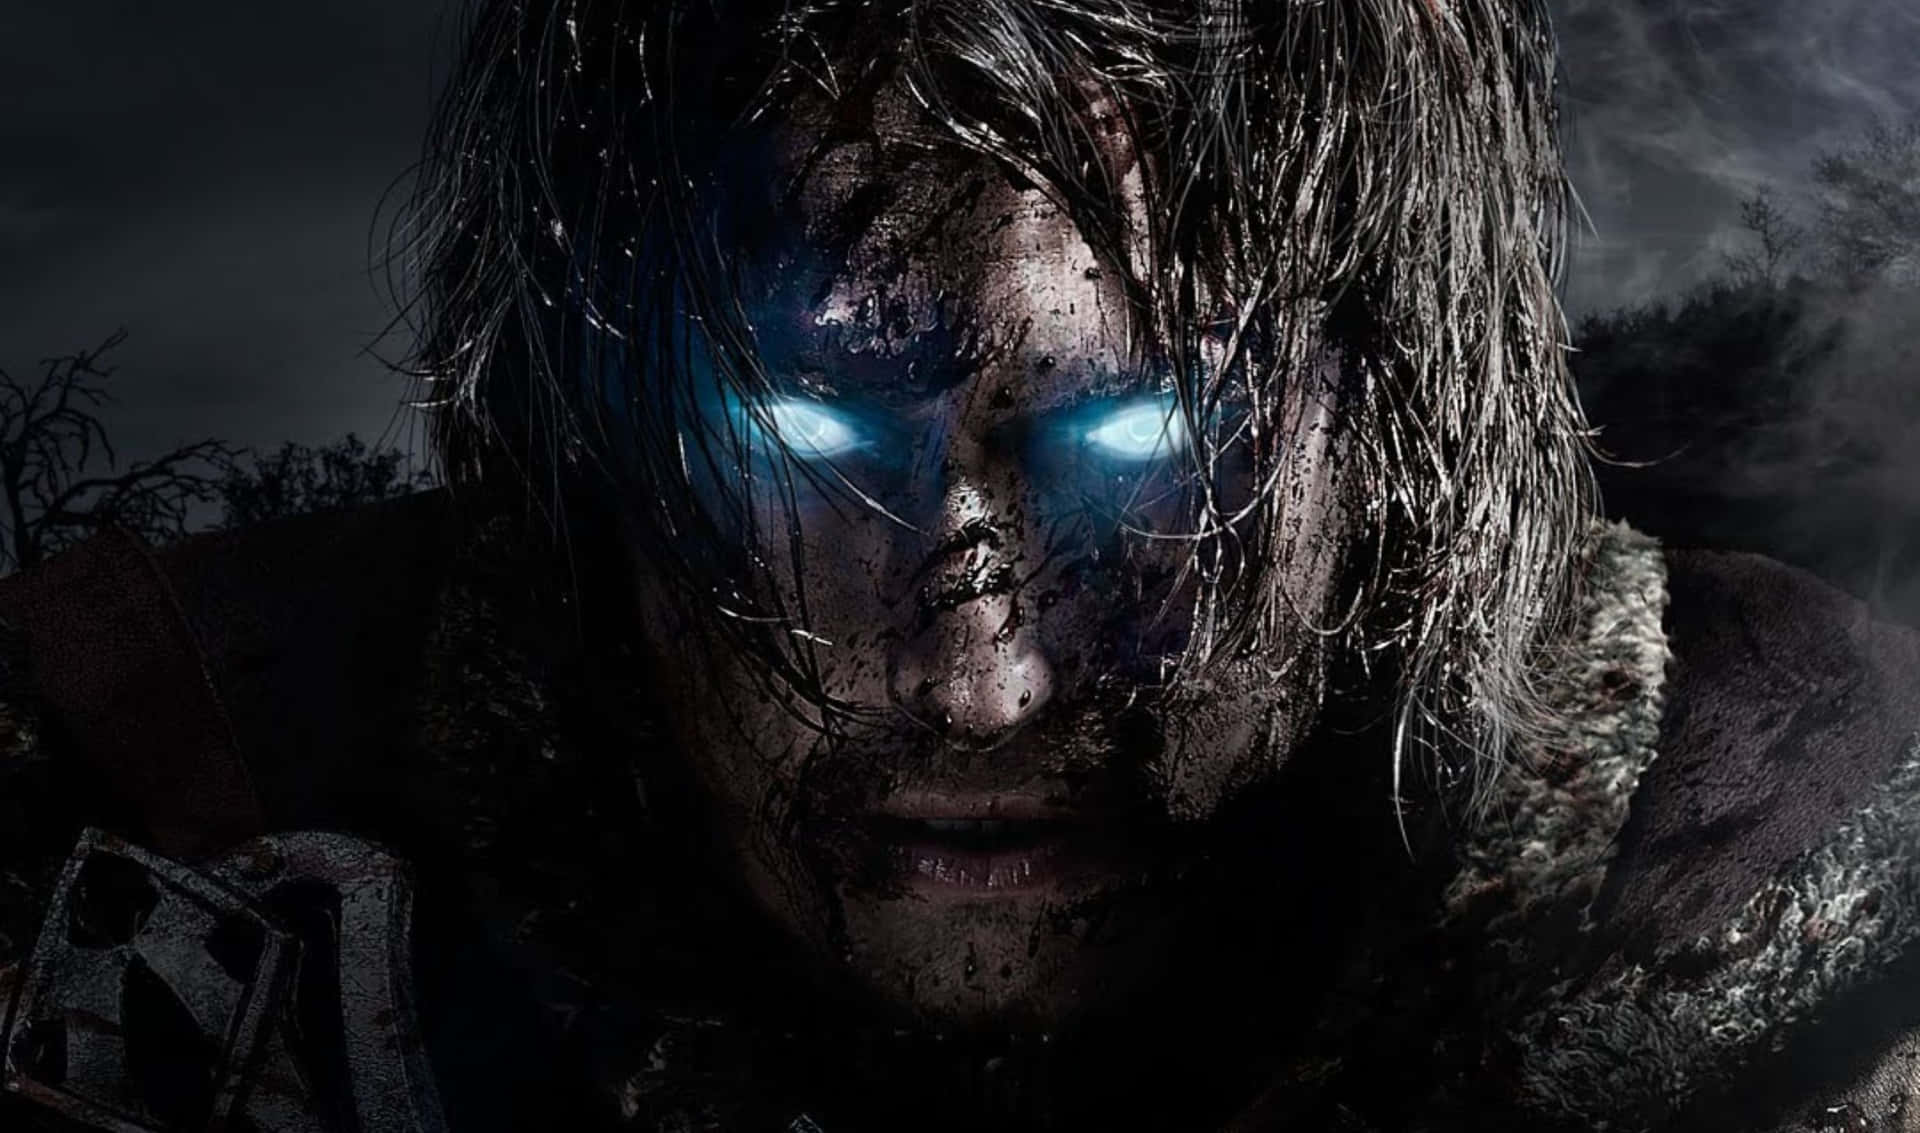 Experience the epic adventure of Shadow of Mordor